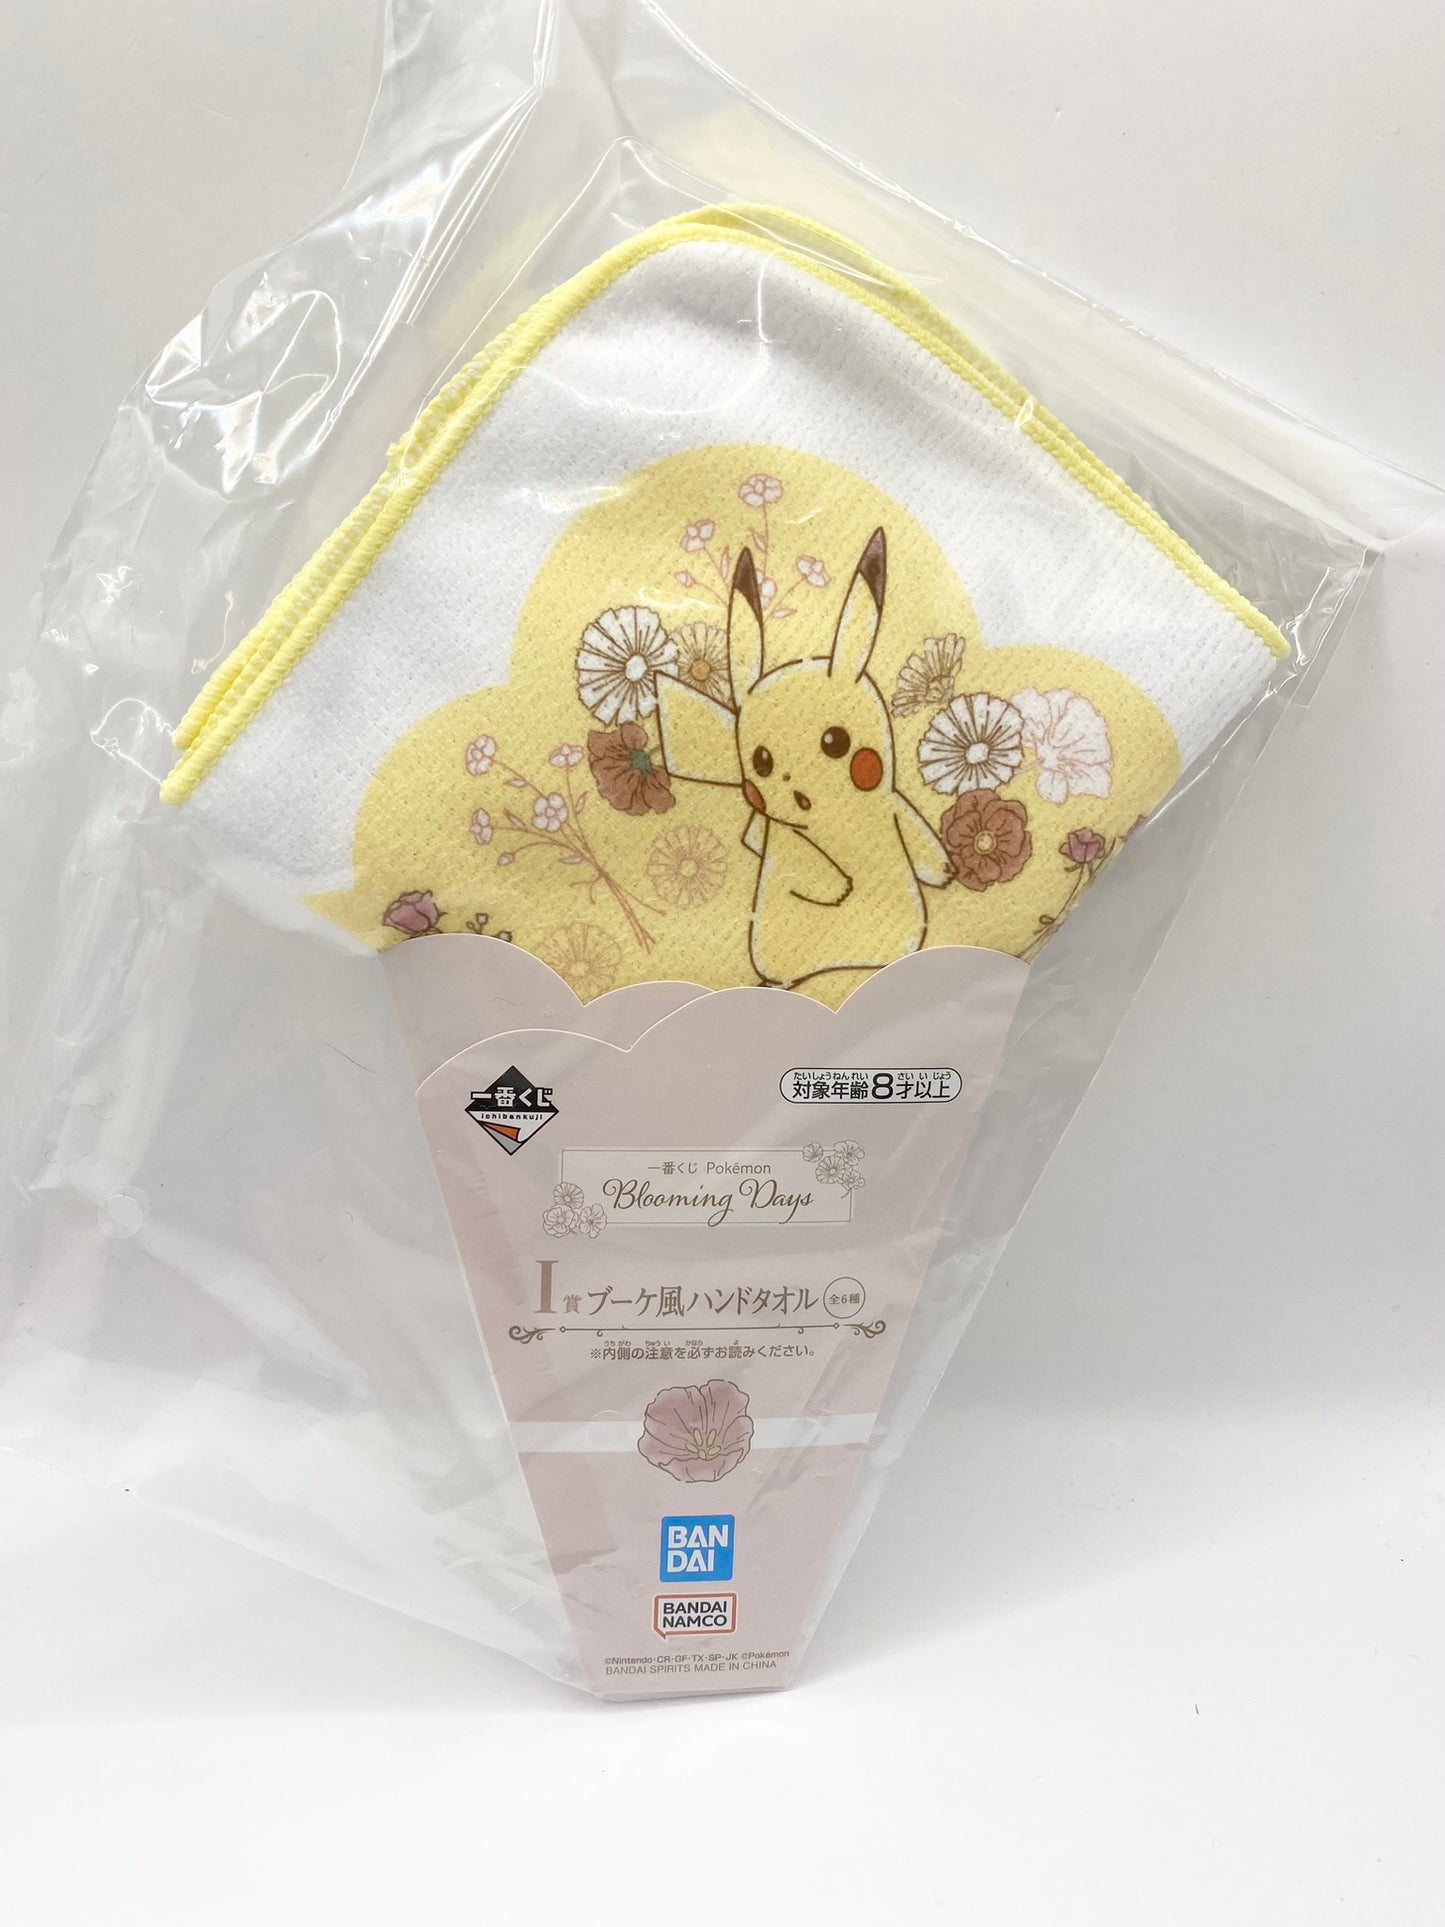 Pokémon Blooming Days Bandai Face Towel / Flannel